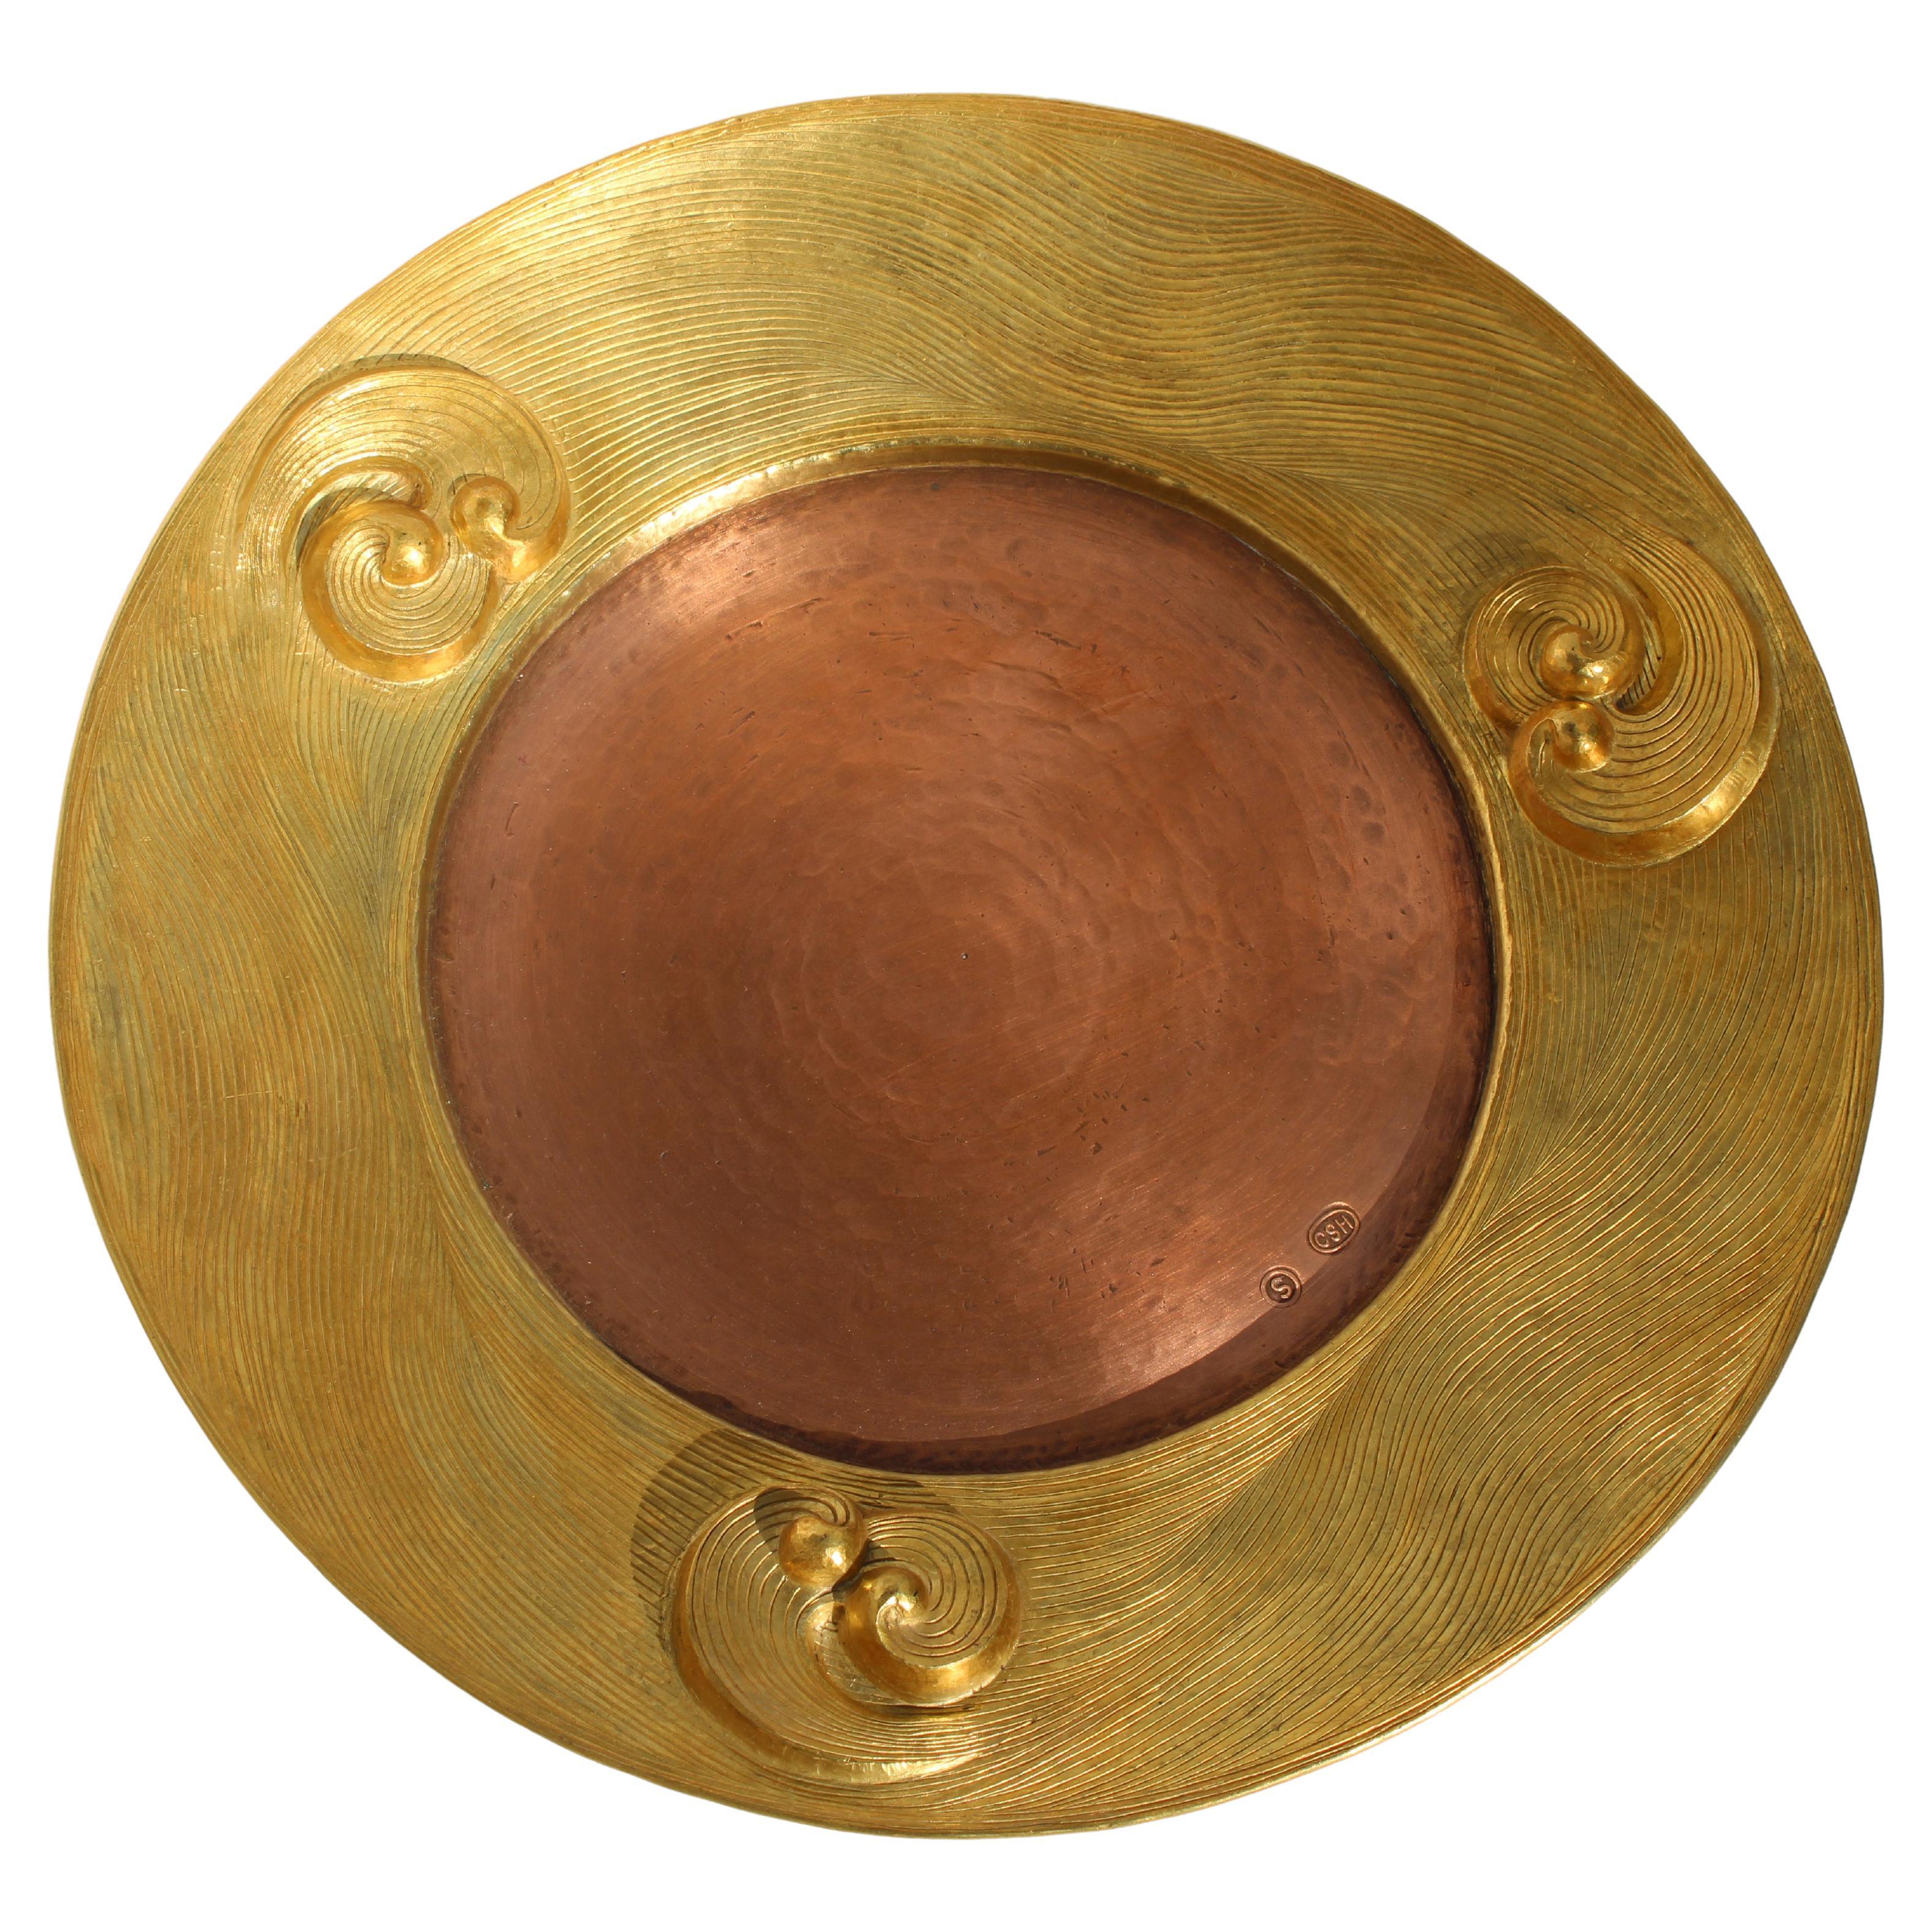 Copper Repousse Plate 13” Dia Handcrafted in India By Stephanie Odegard